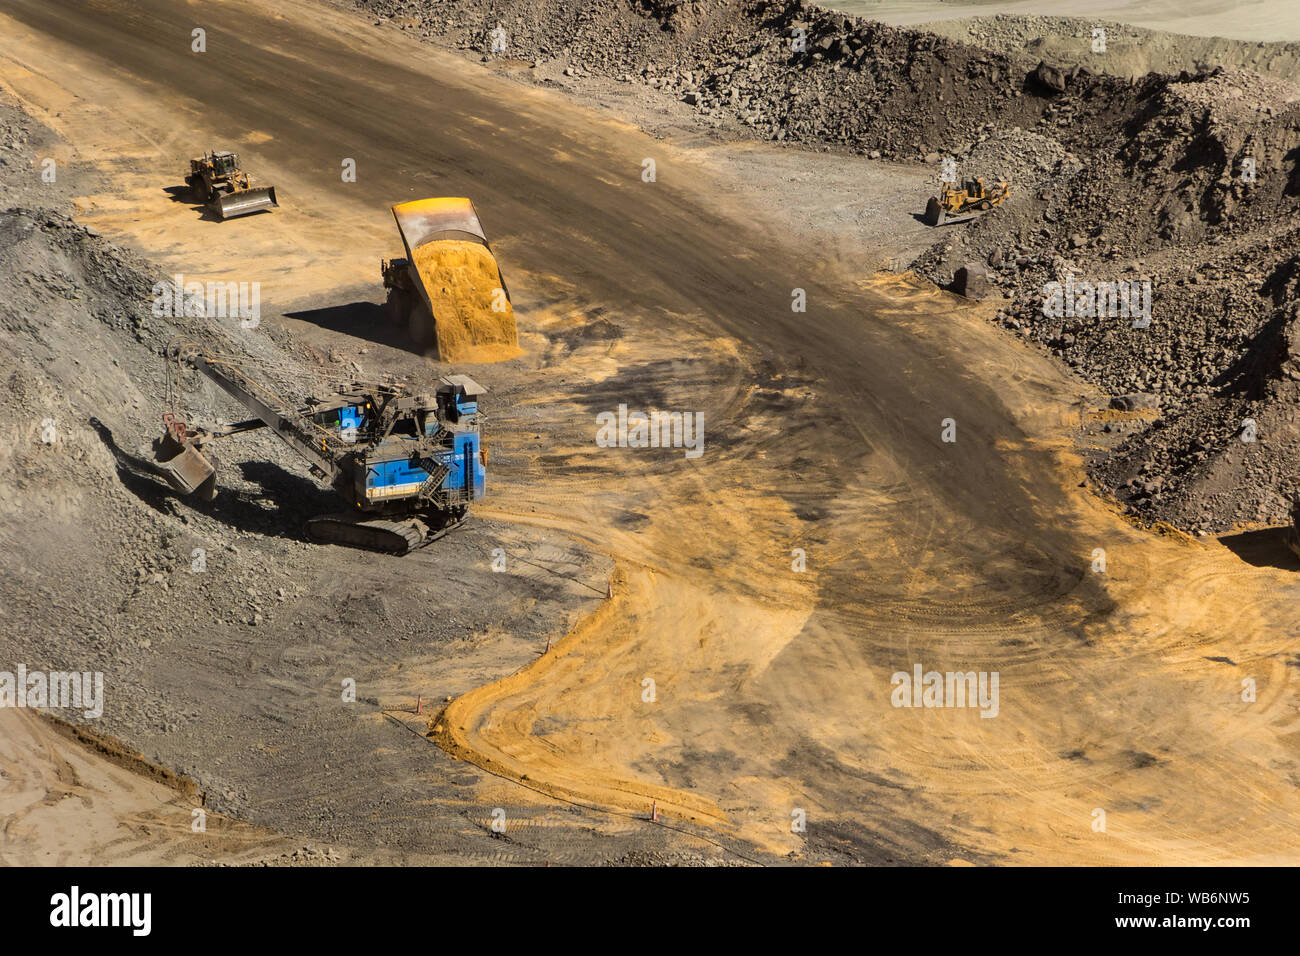 An open pit diamond mine in Botswana with heavy machinery on site. Stock Photo